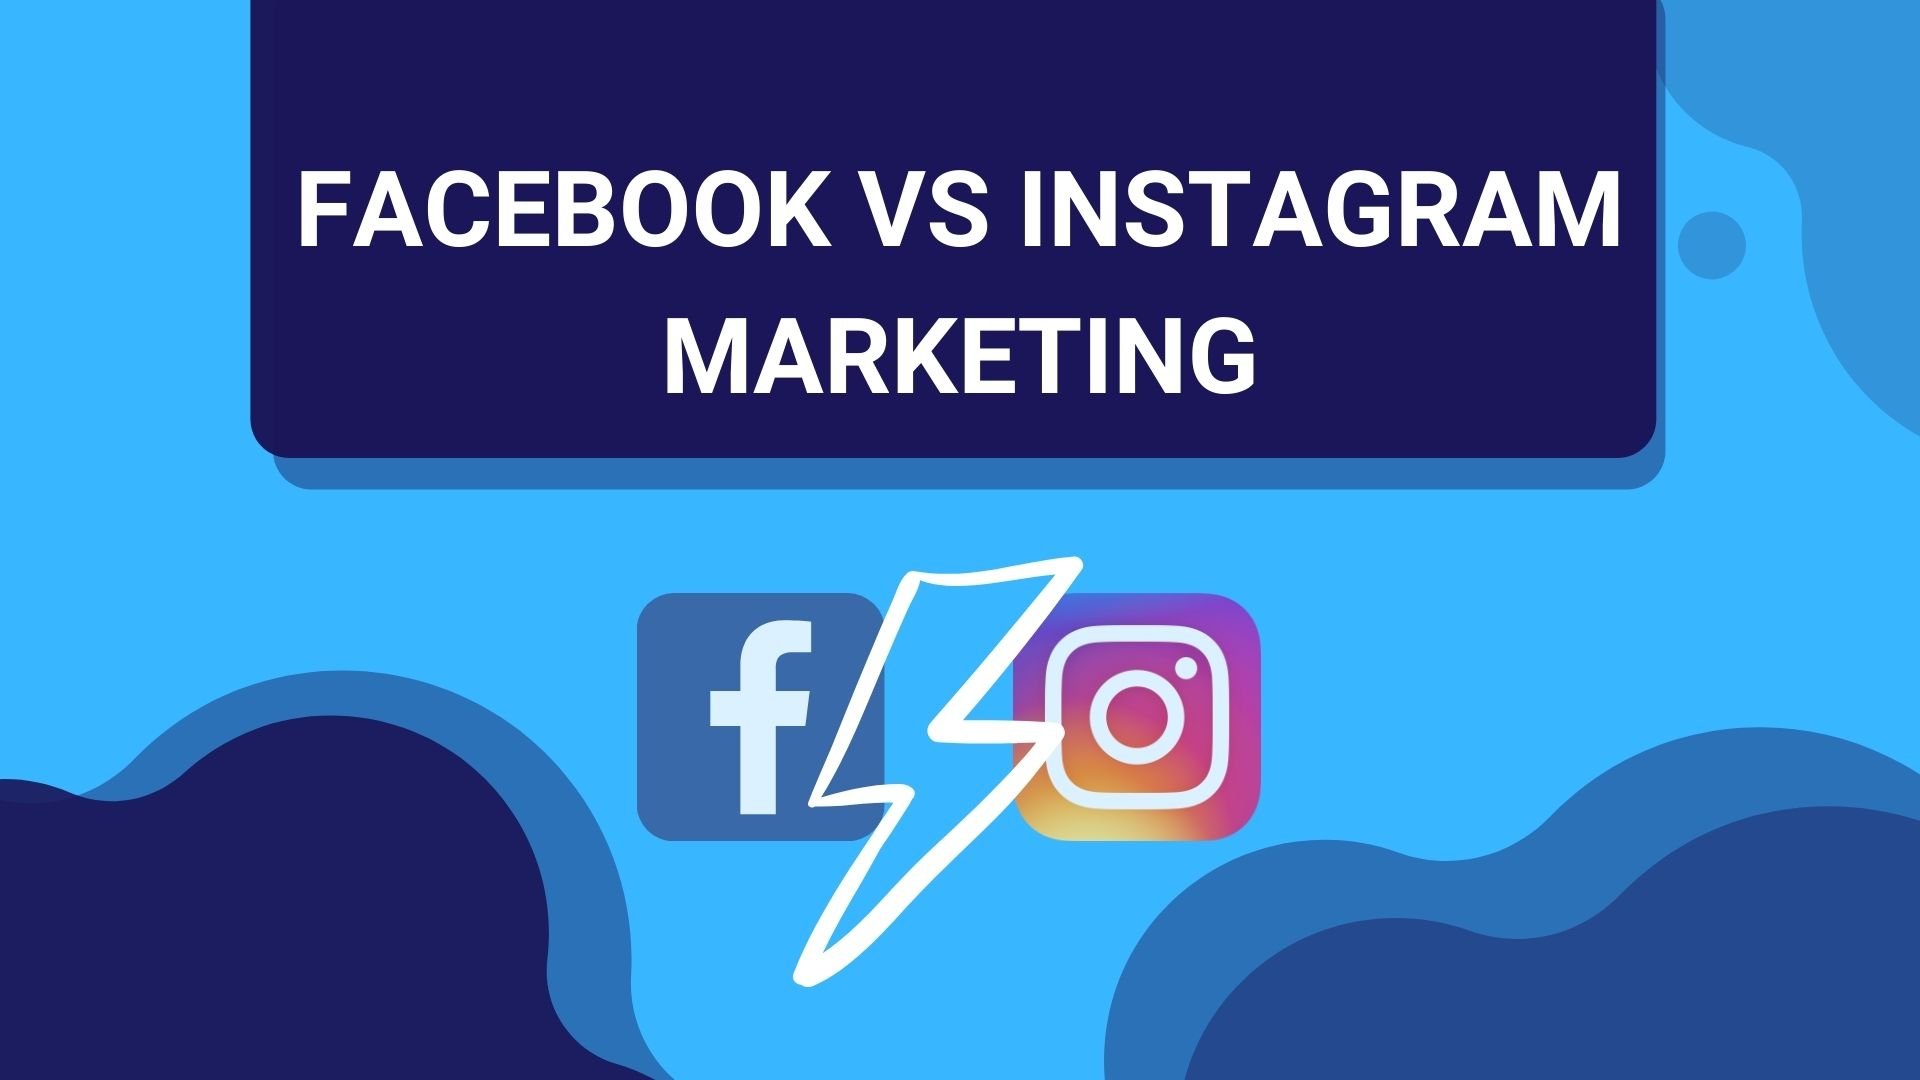 Is It Better To Market on Facebook or Instagram?